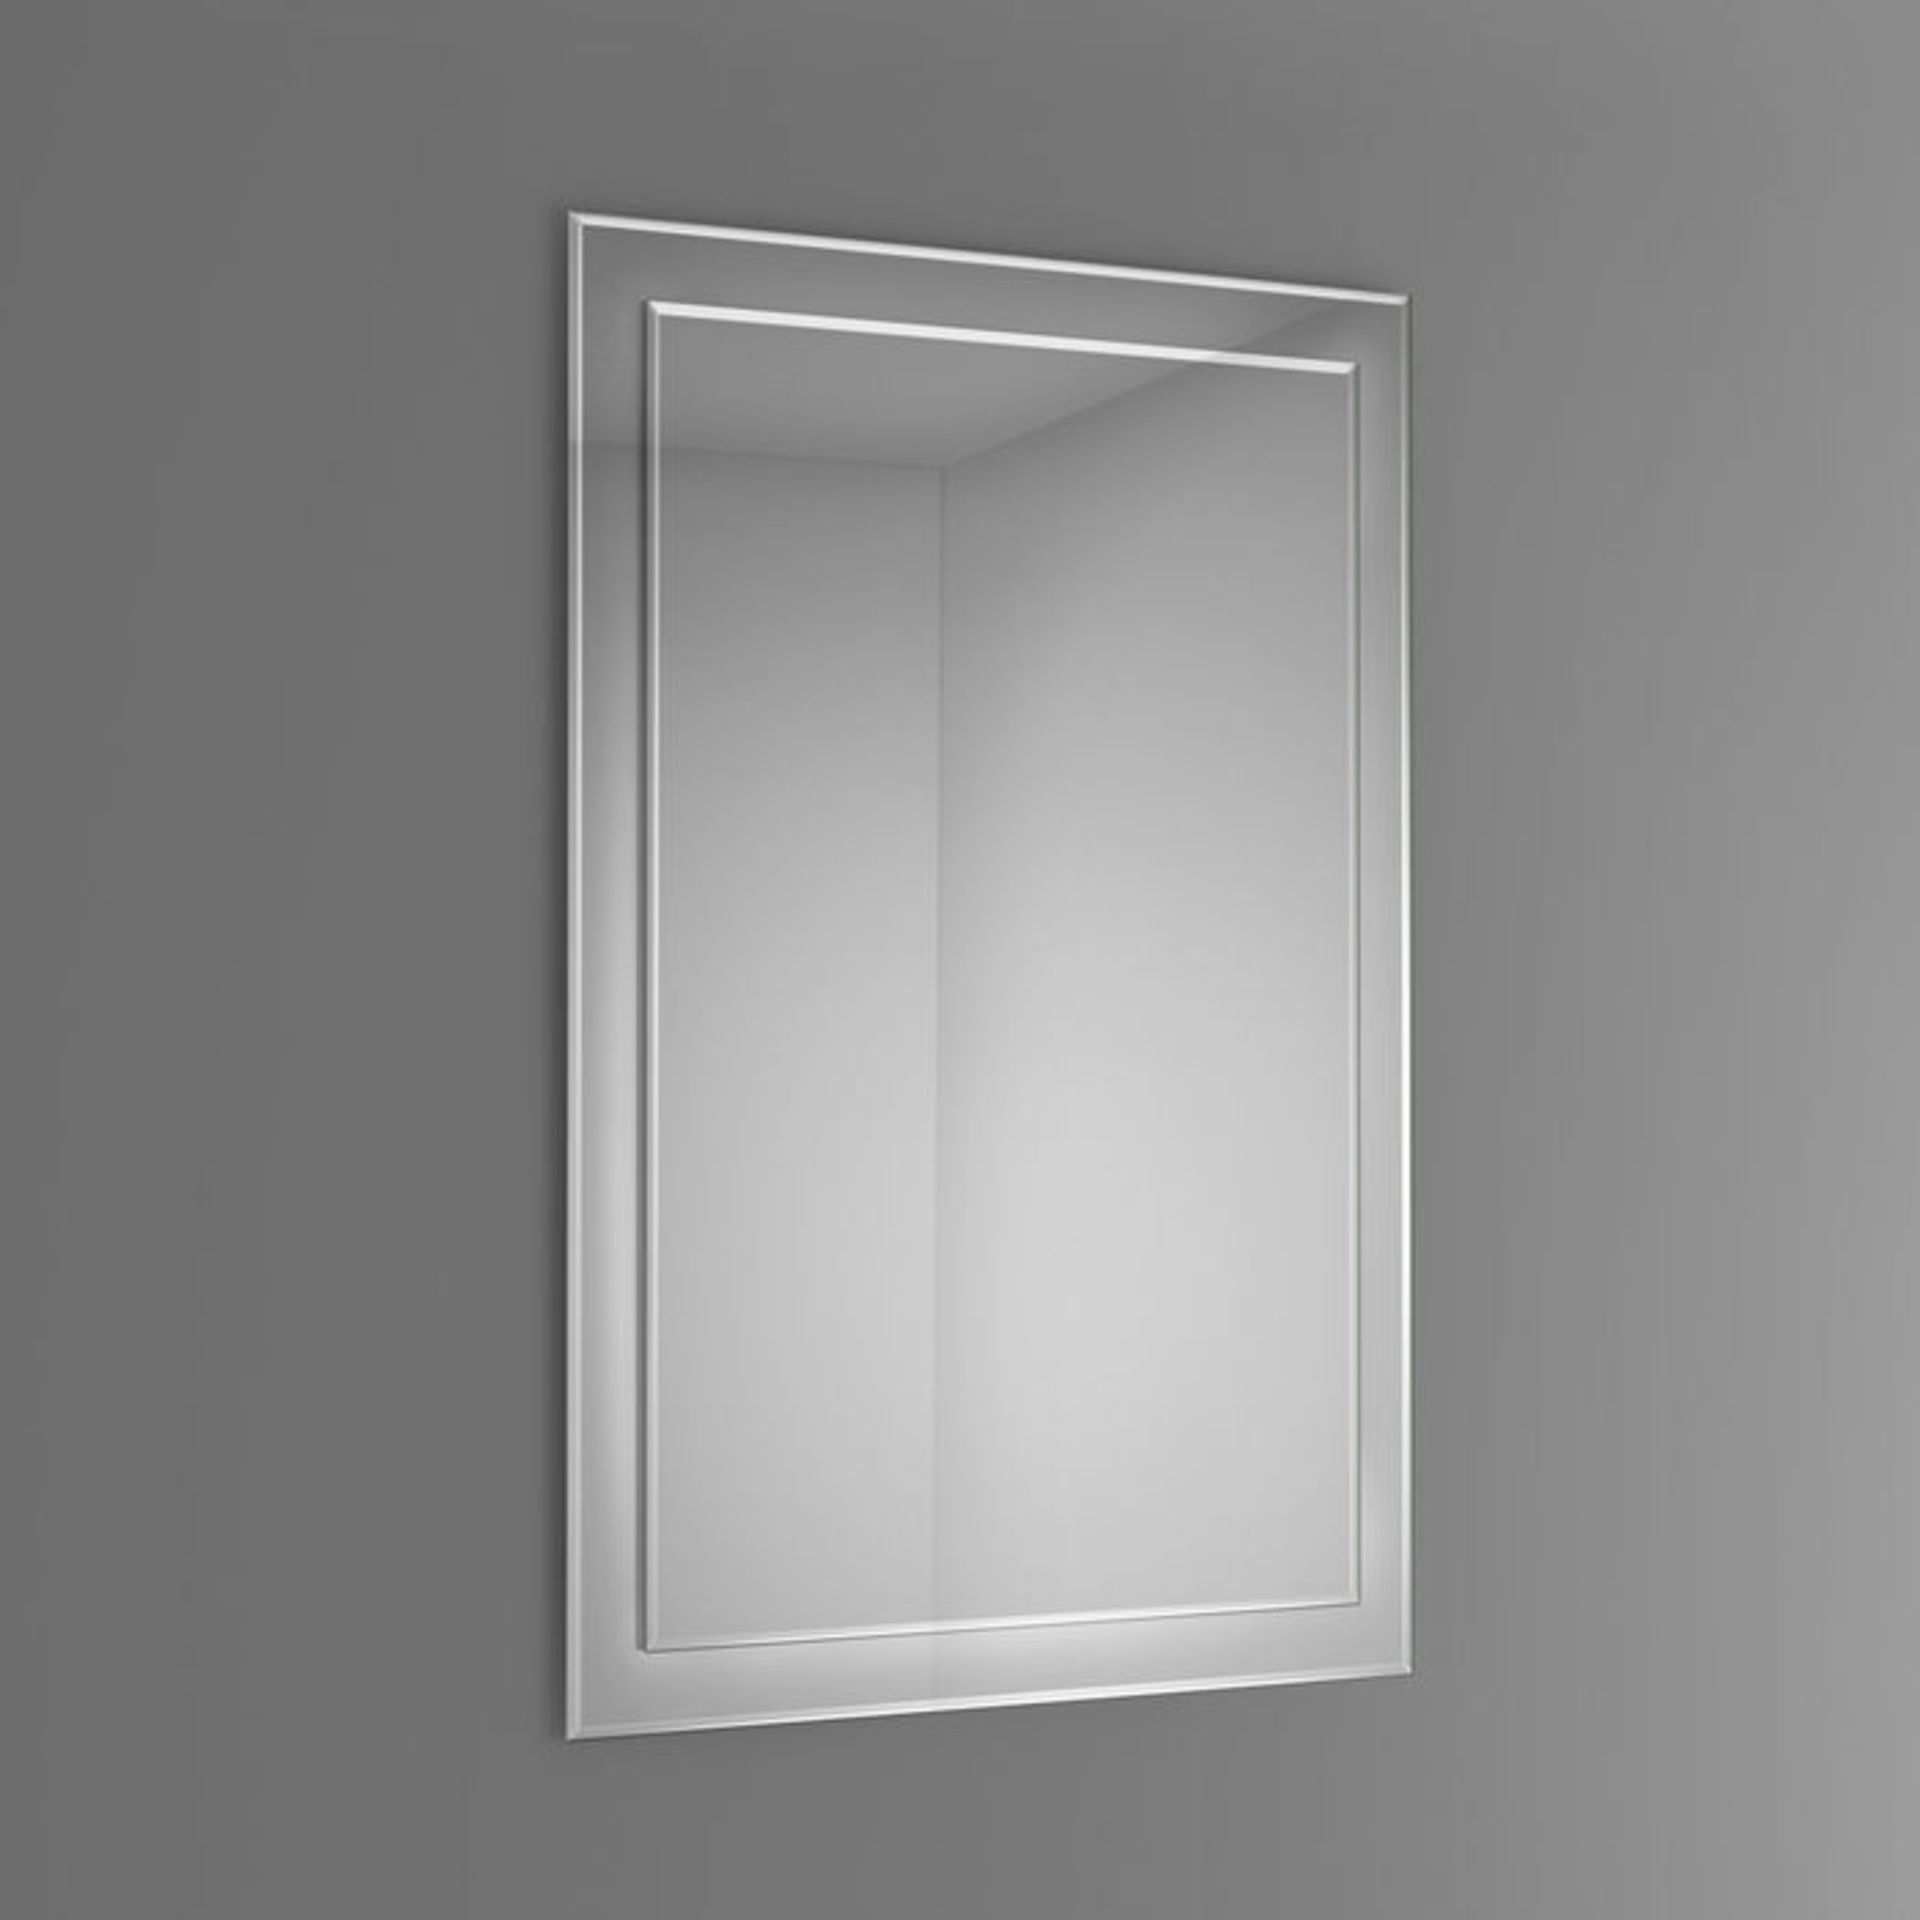 (NY179) 900x650mm Bevel Mirror. Smooth beveled edge for additional safety and style Supplied fully - Image 3 of 3